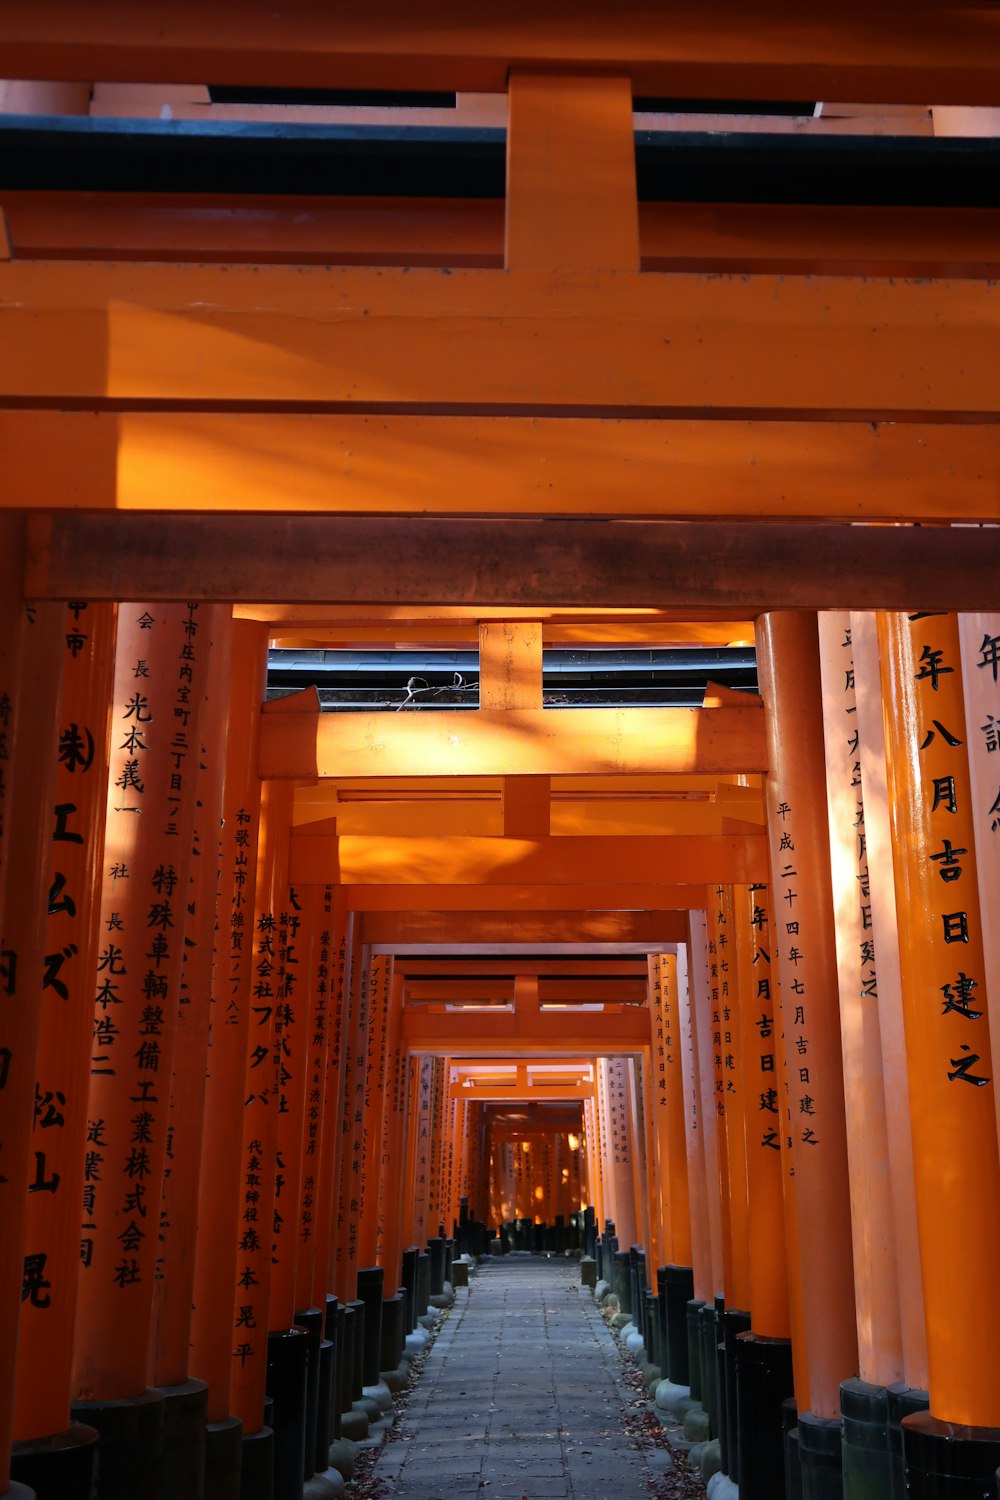 a walkway lined with tall orange pillars with writing on them